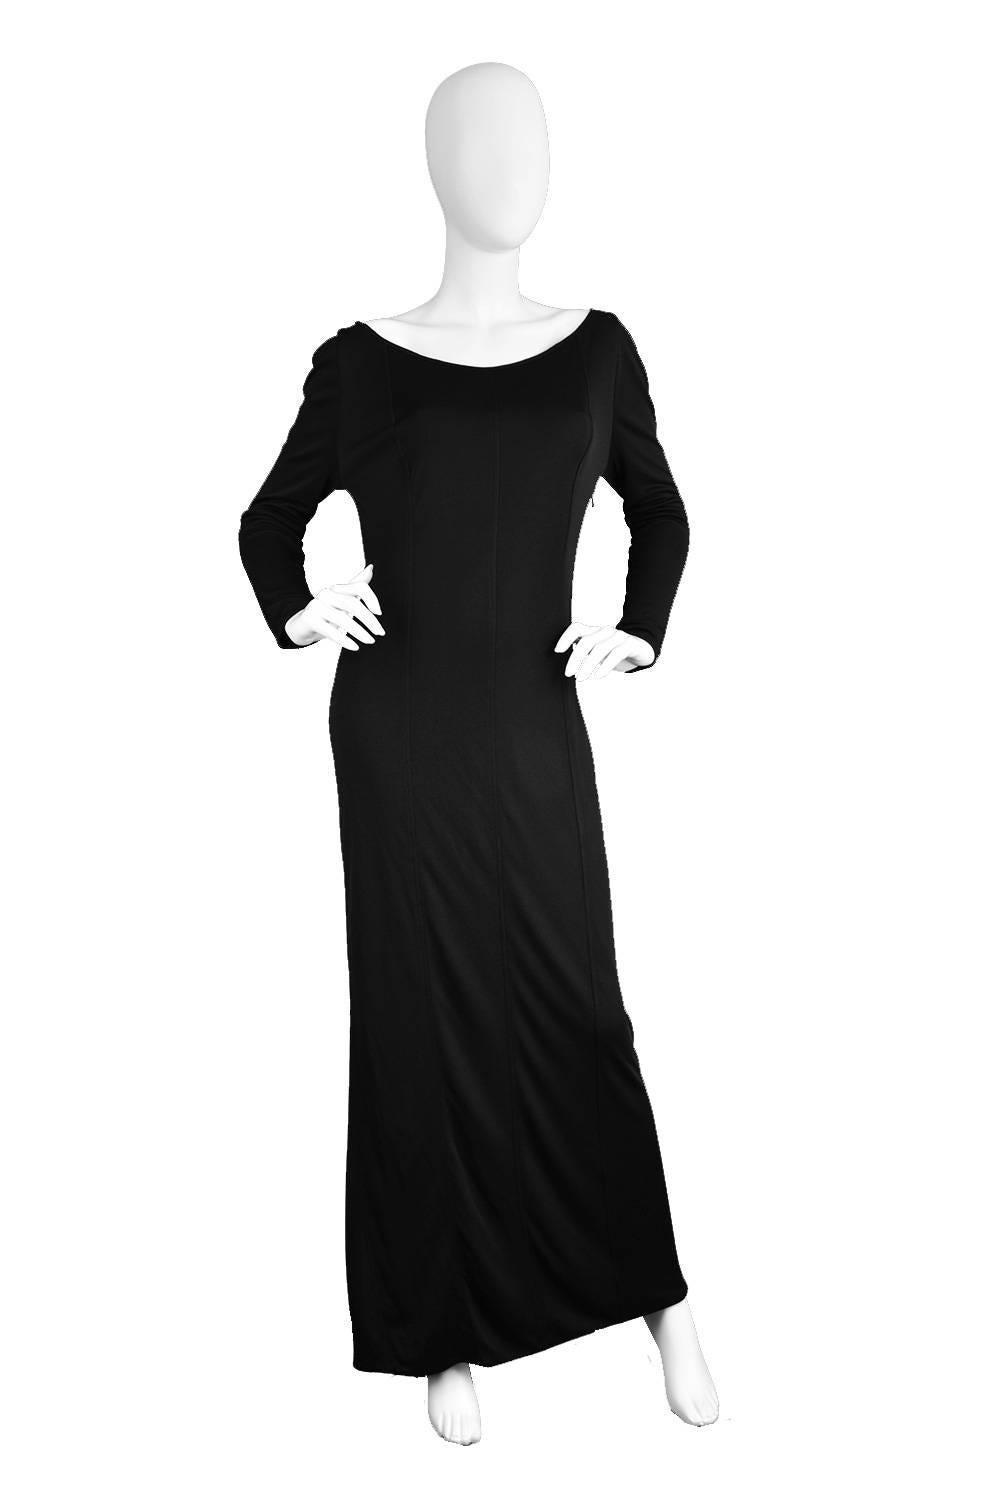 An incredibly elegant vintage evening gown from the 1970s by Yuki of London, from his higher end own label, before he started working with the lower priced line at Rembrandt. This stunning dress has a scoop neck that flaunts the sensual décolletage